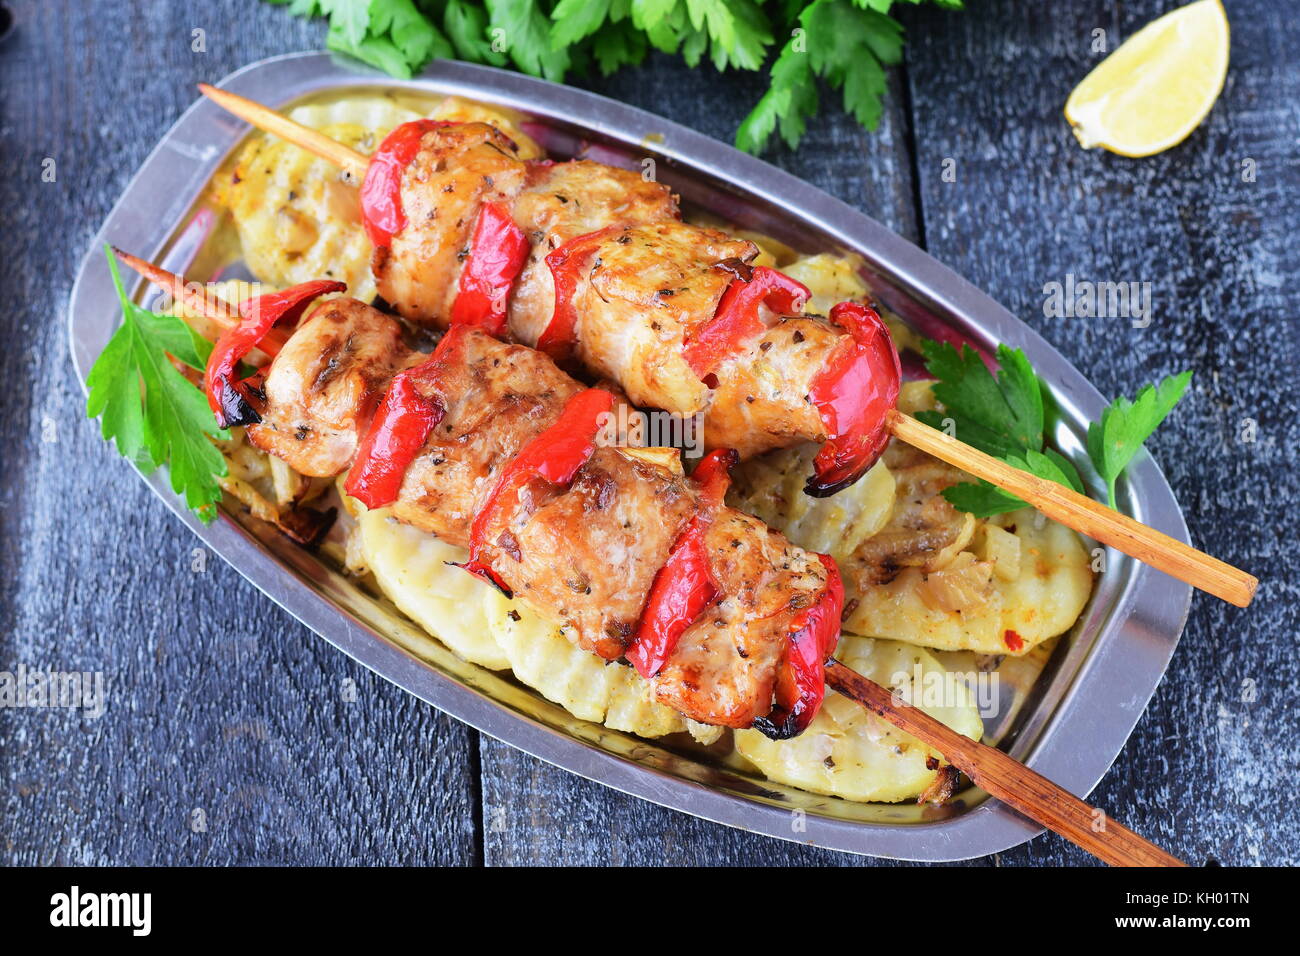 Chicken fillet with sweet paprika grilled with fried potato on a metal plate on a wooden background. Healthy eating concept Stock Photo